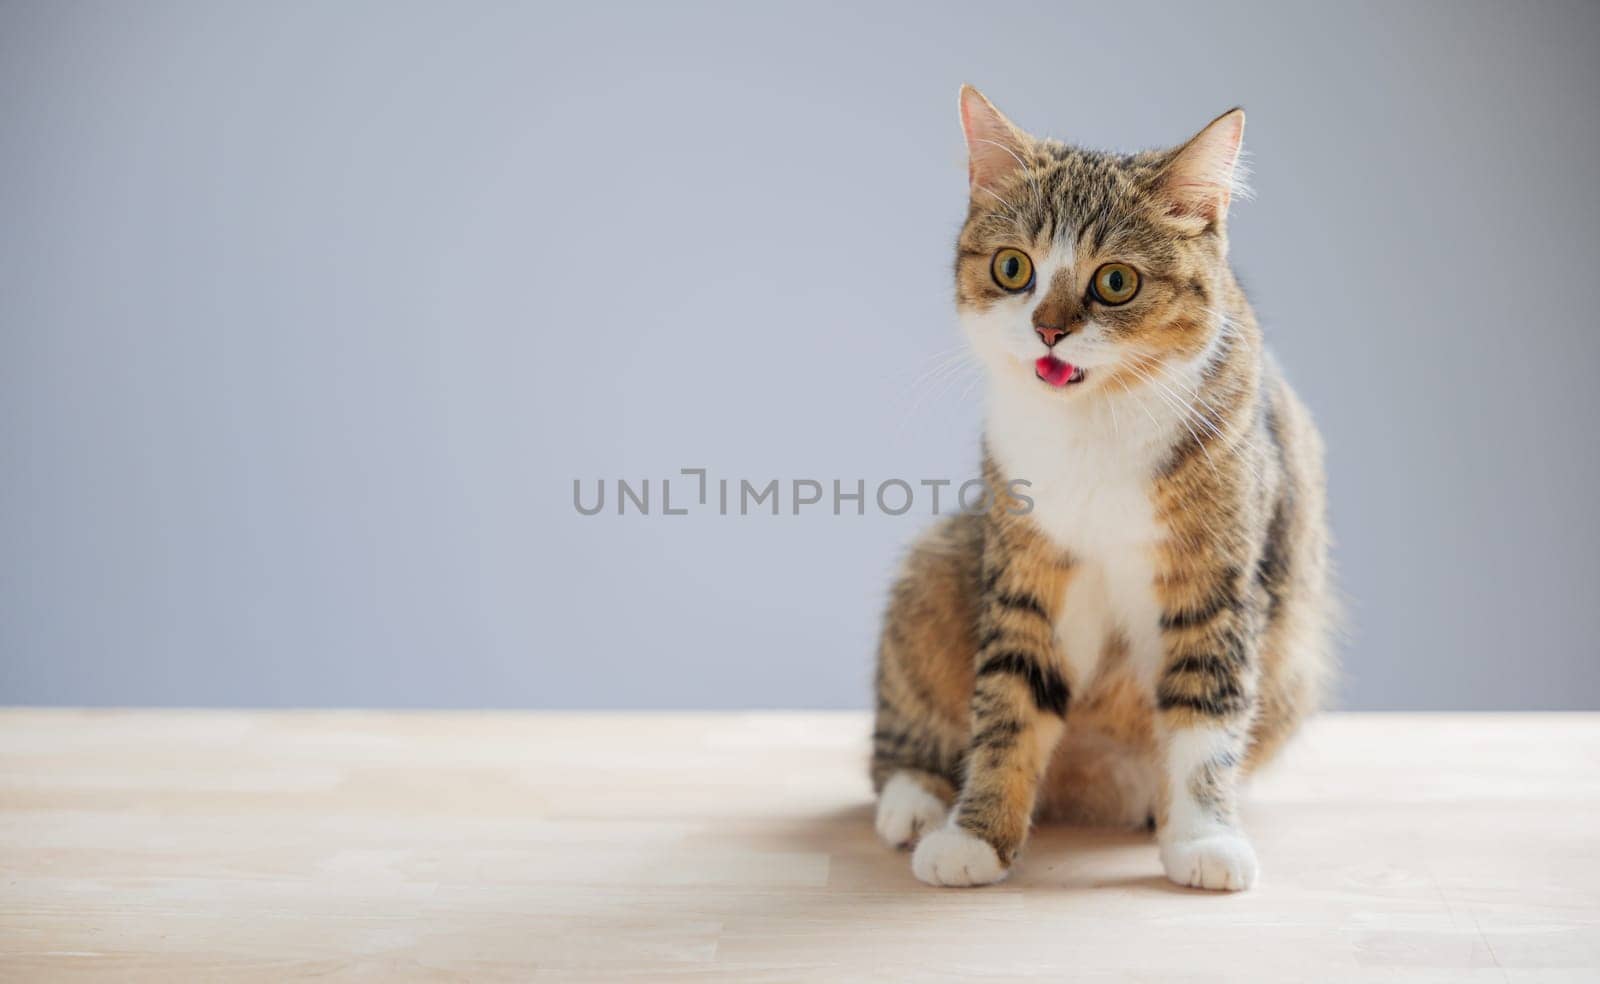 A cheerful and playful little grey Scottish Fold cat is isolated on a white background in this beautiful cat portrait.